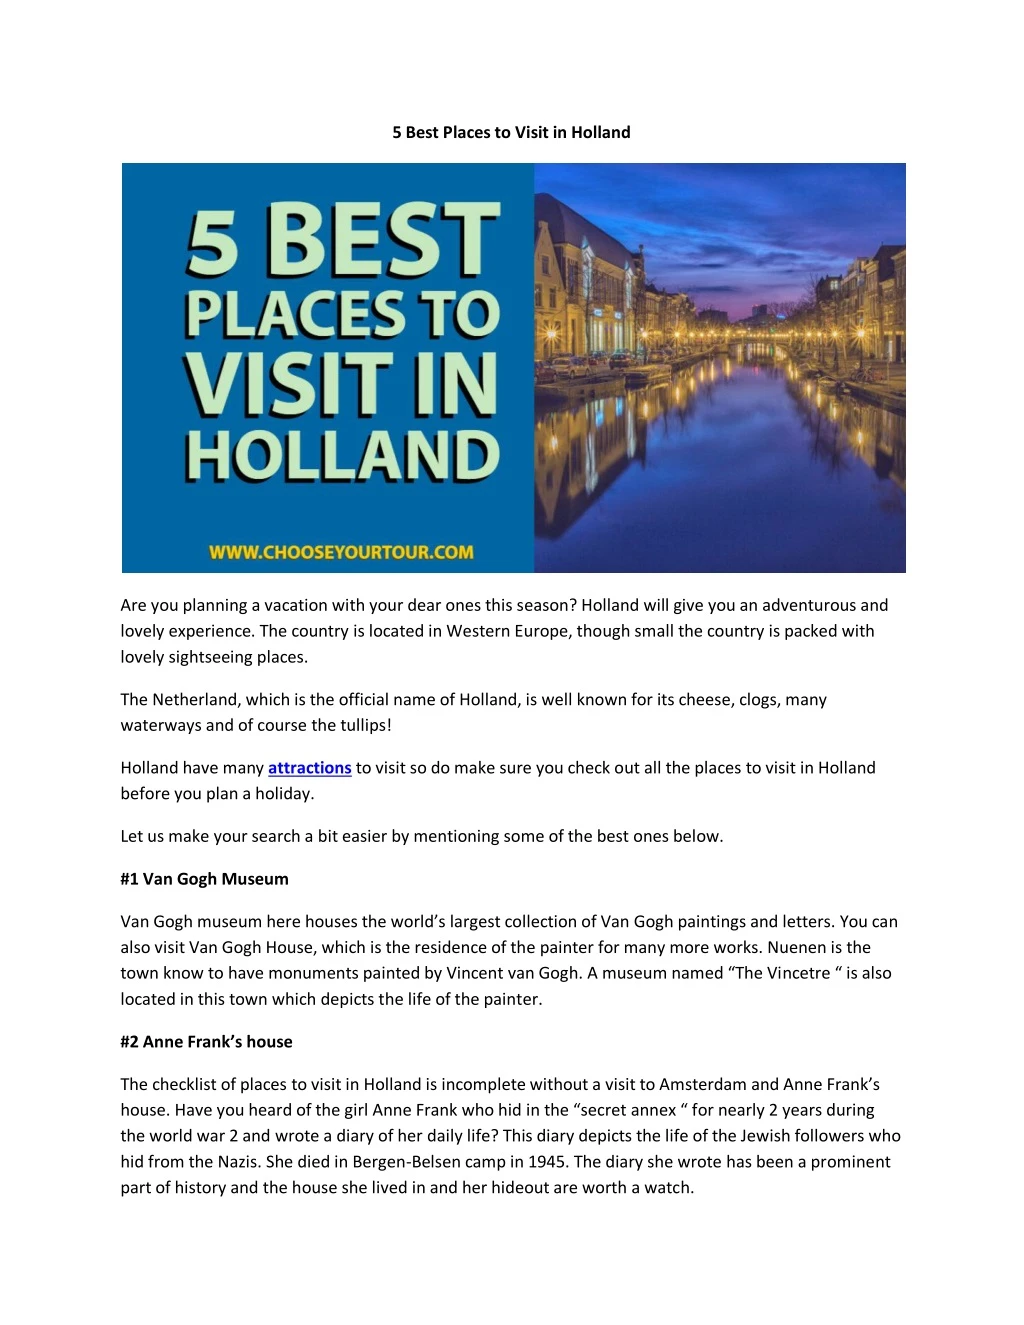 5 best places to visit in holland